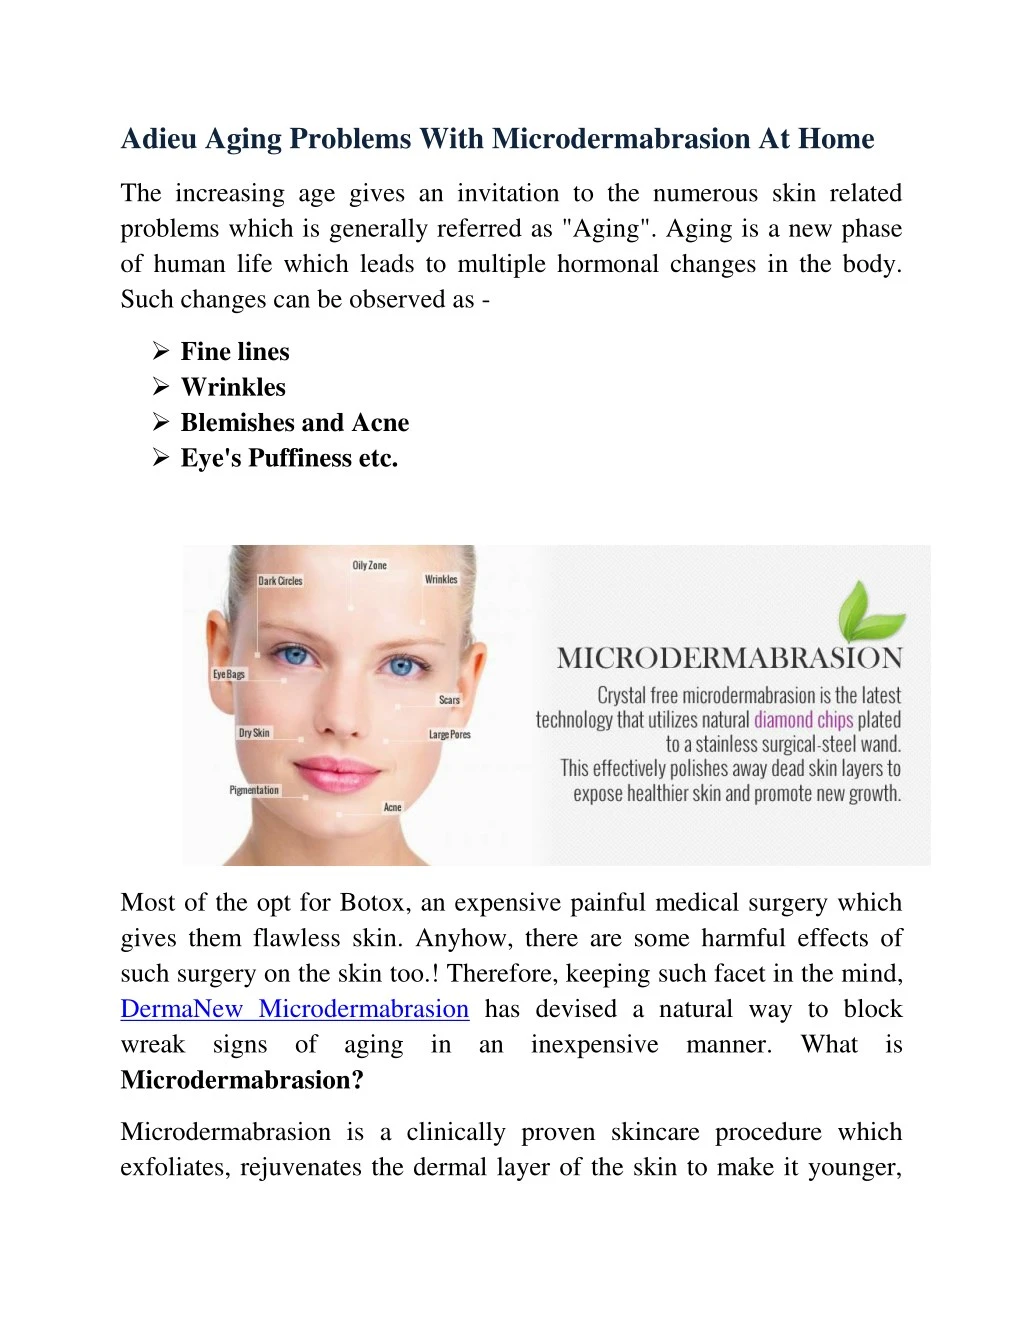 adieu aging problems with microdermabrasion